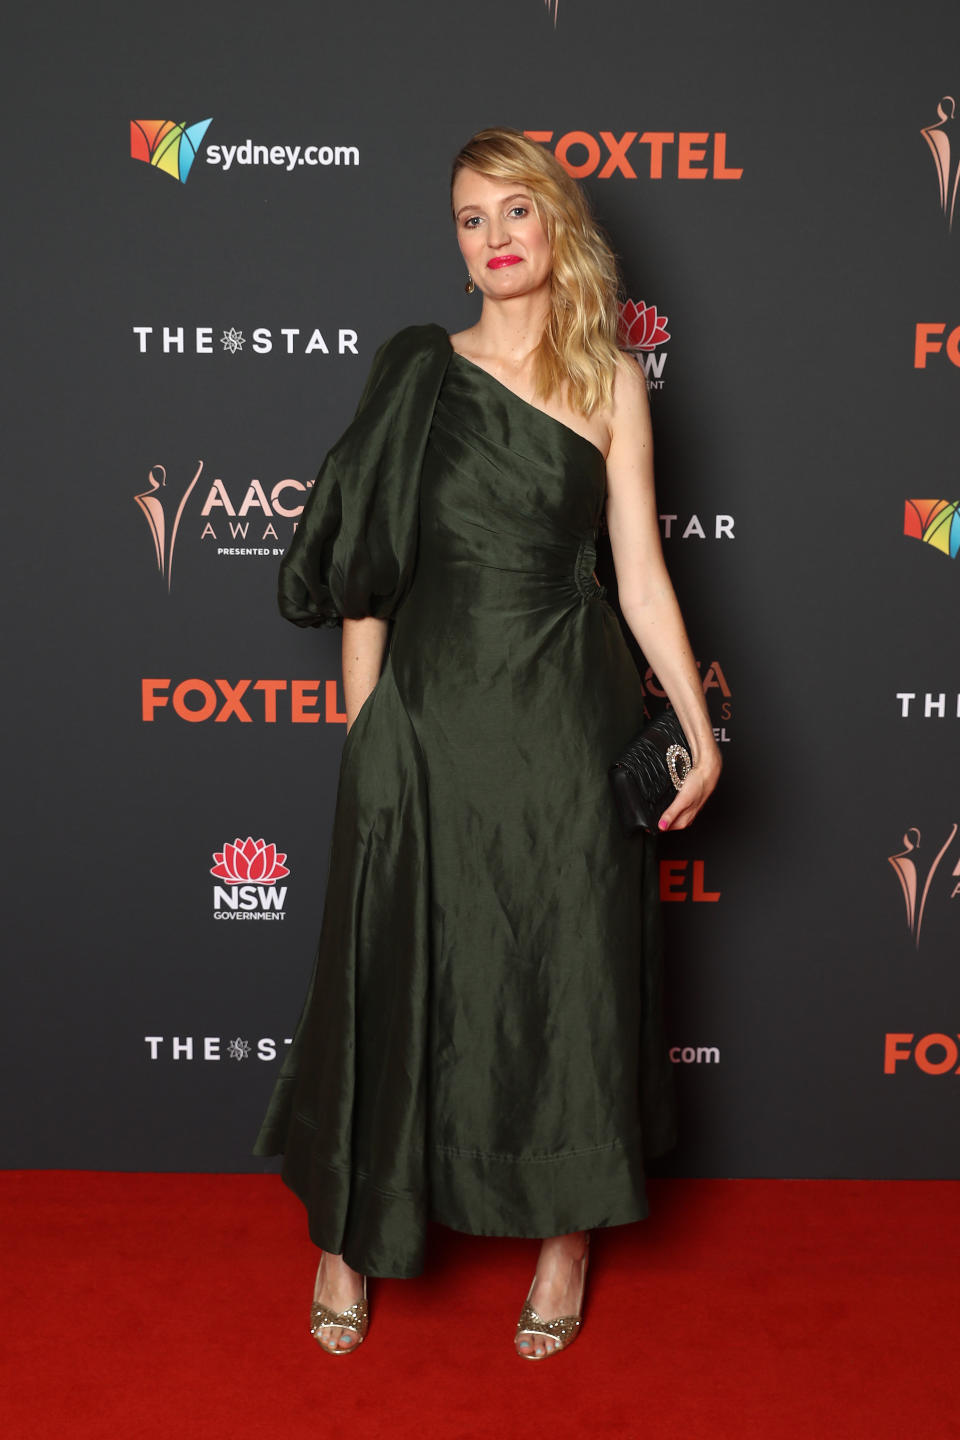 Shannon Murphy arrives ahead of the 2020 AACTA Awards presented by Foxtel at The Star on November 30, 2020 in Sydney, Australia